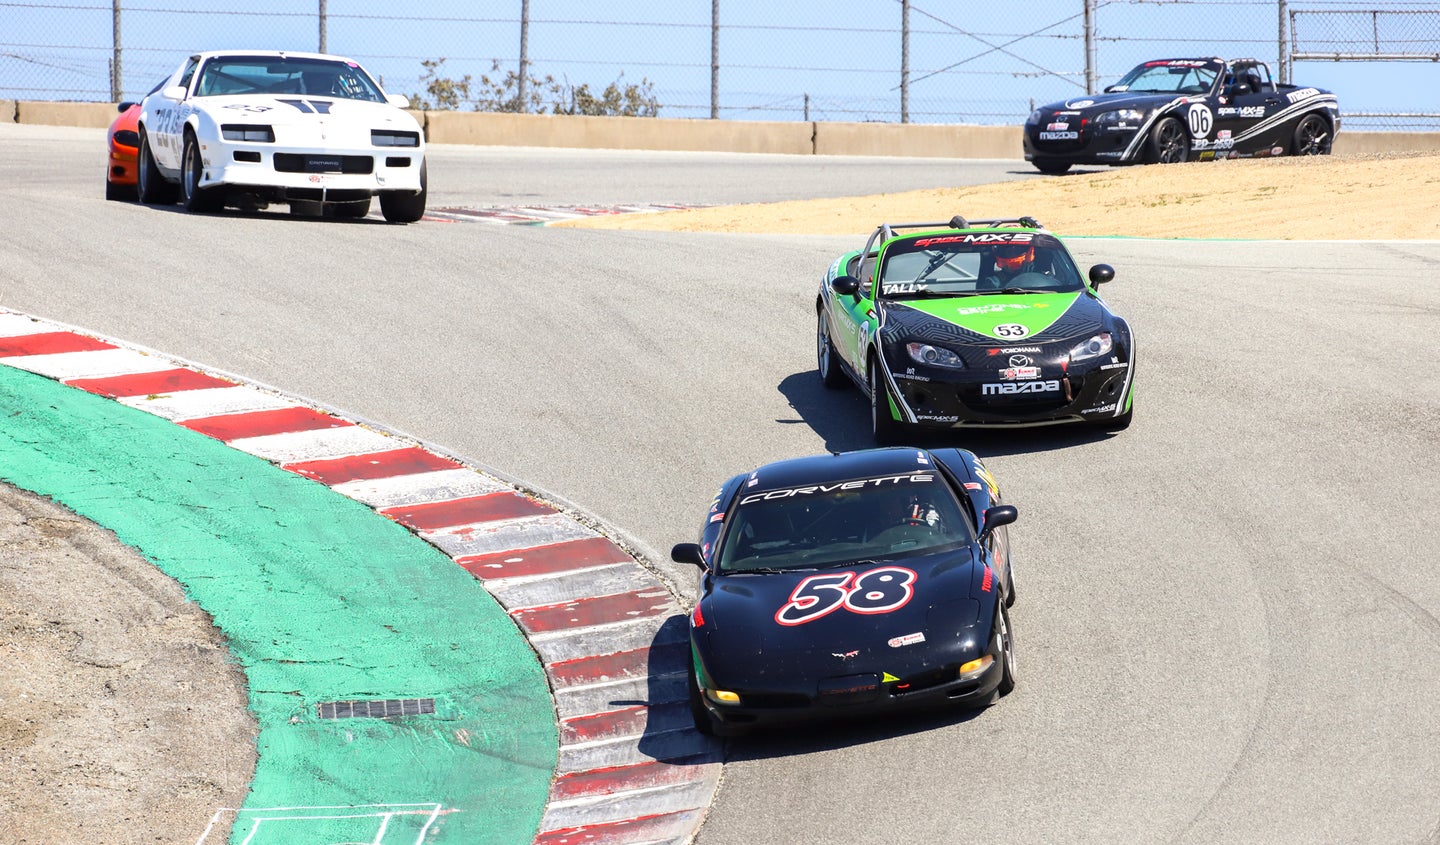 SFI Foundation club racing in action